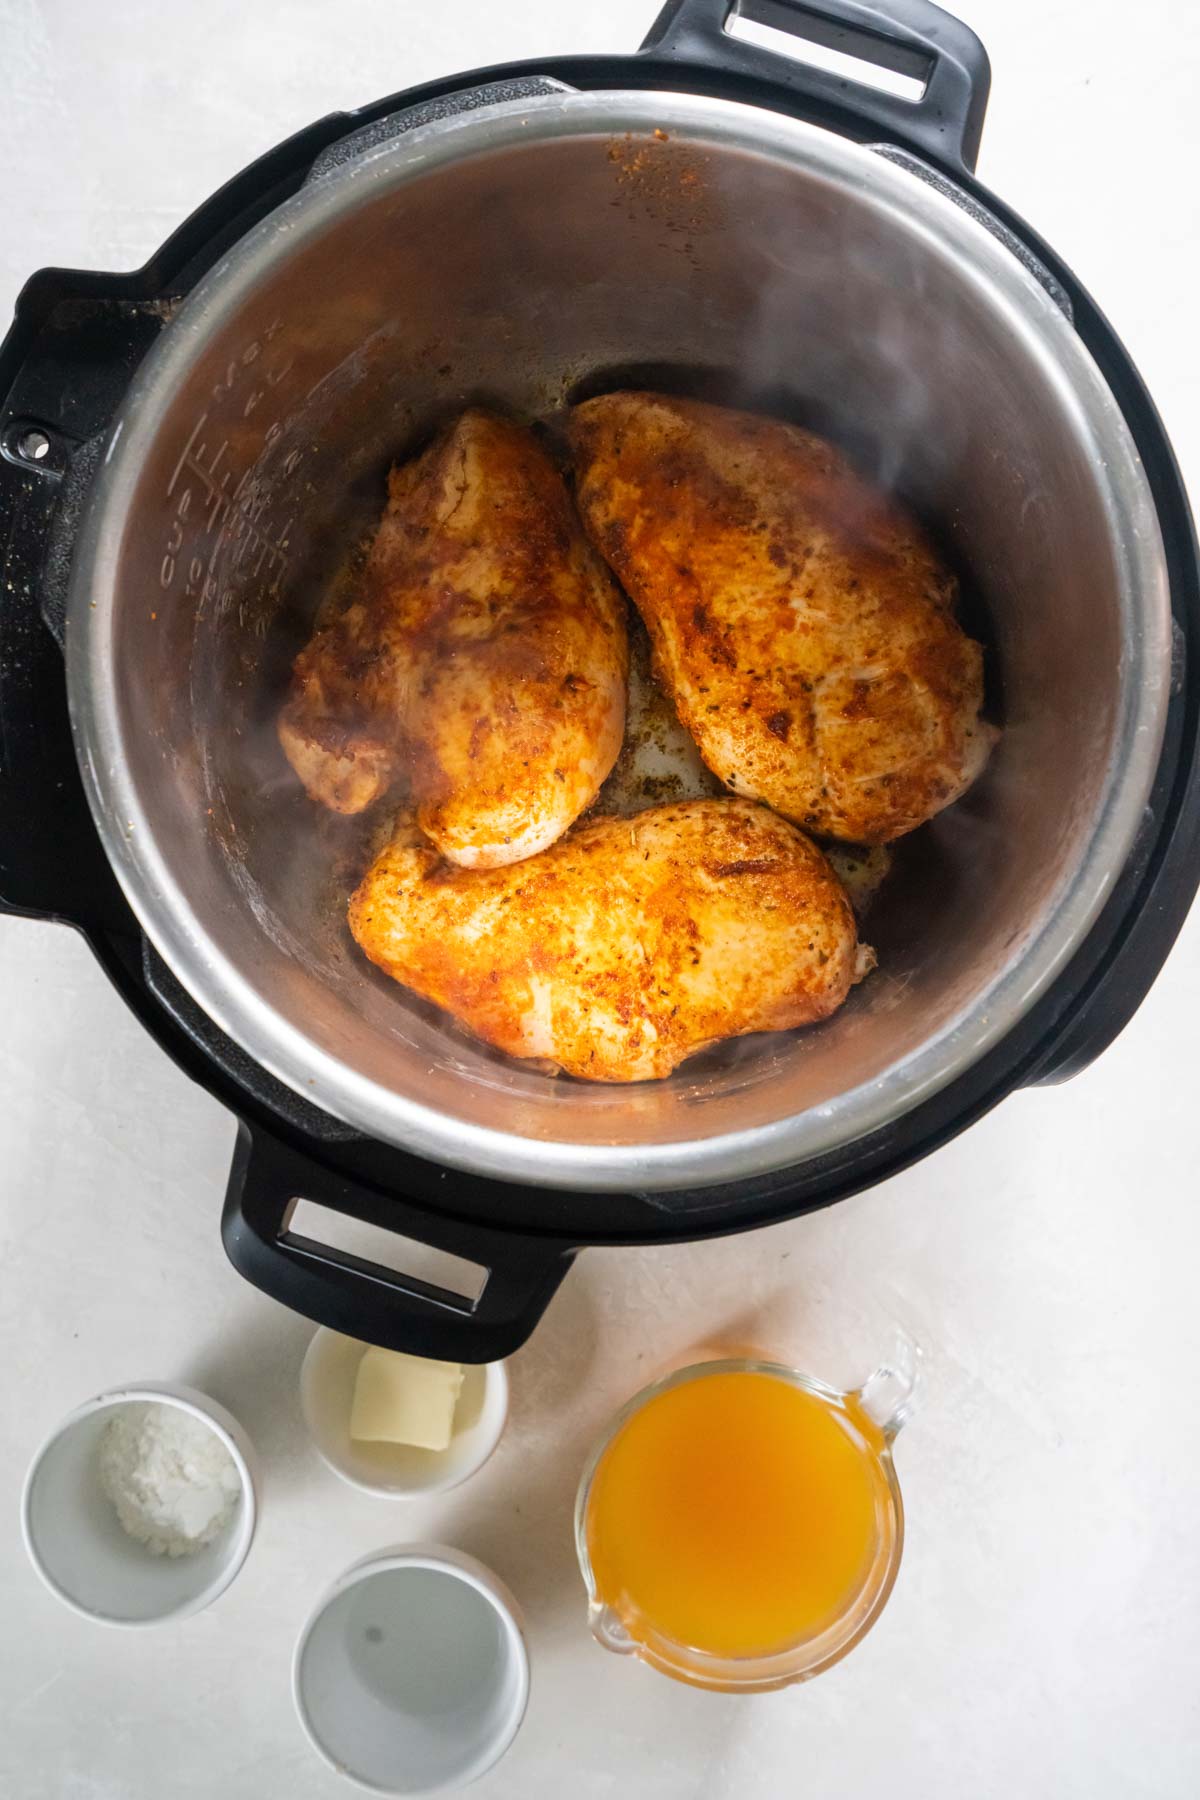 Browning chicken breasts in instant pot.